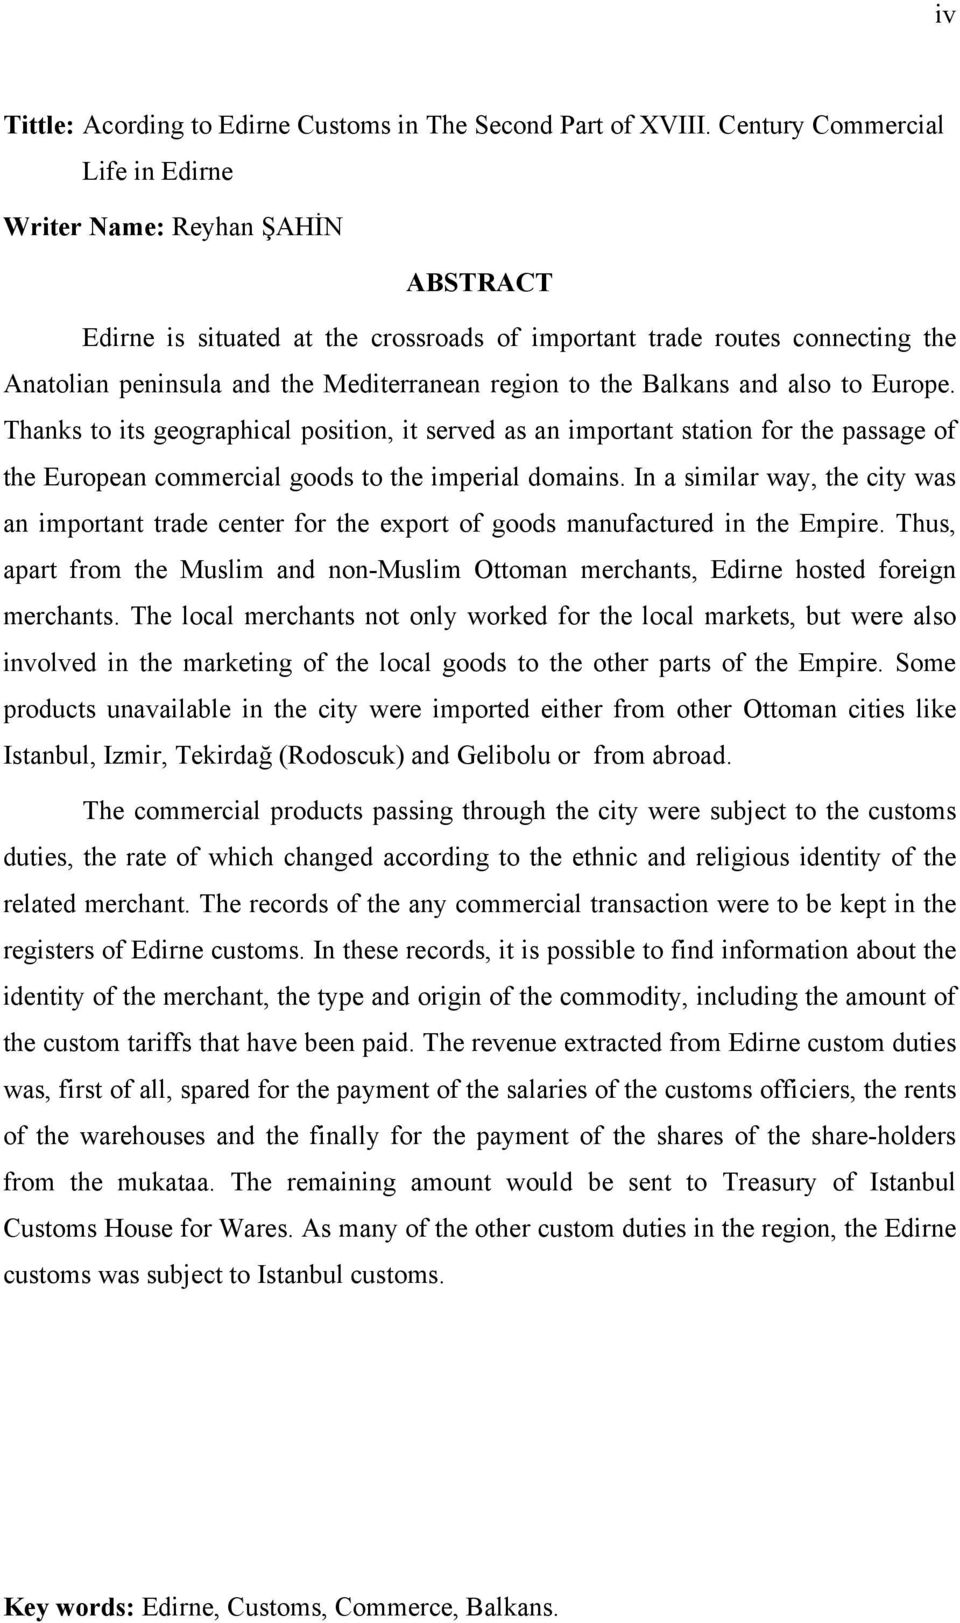 the Balkans and also to Europe. Thanks to its geographical position, it served as an important station for the passage of the European commercial goods to the imperial domains.